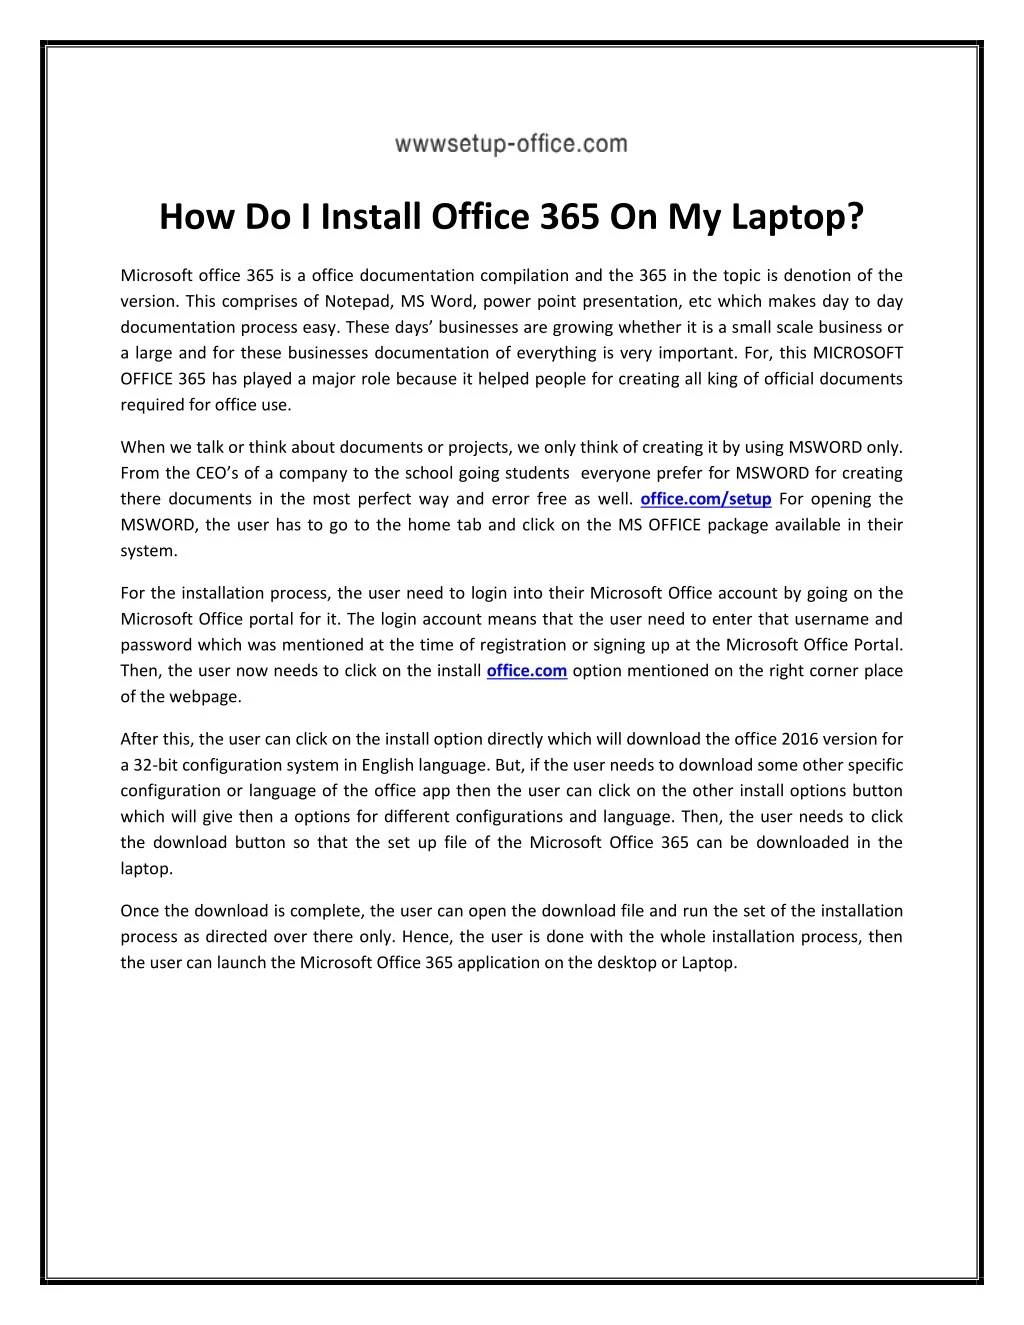 how do i install office 365 on my laptop